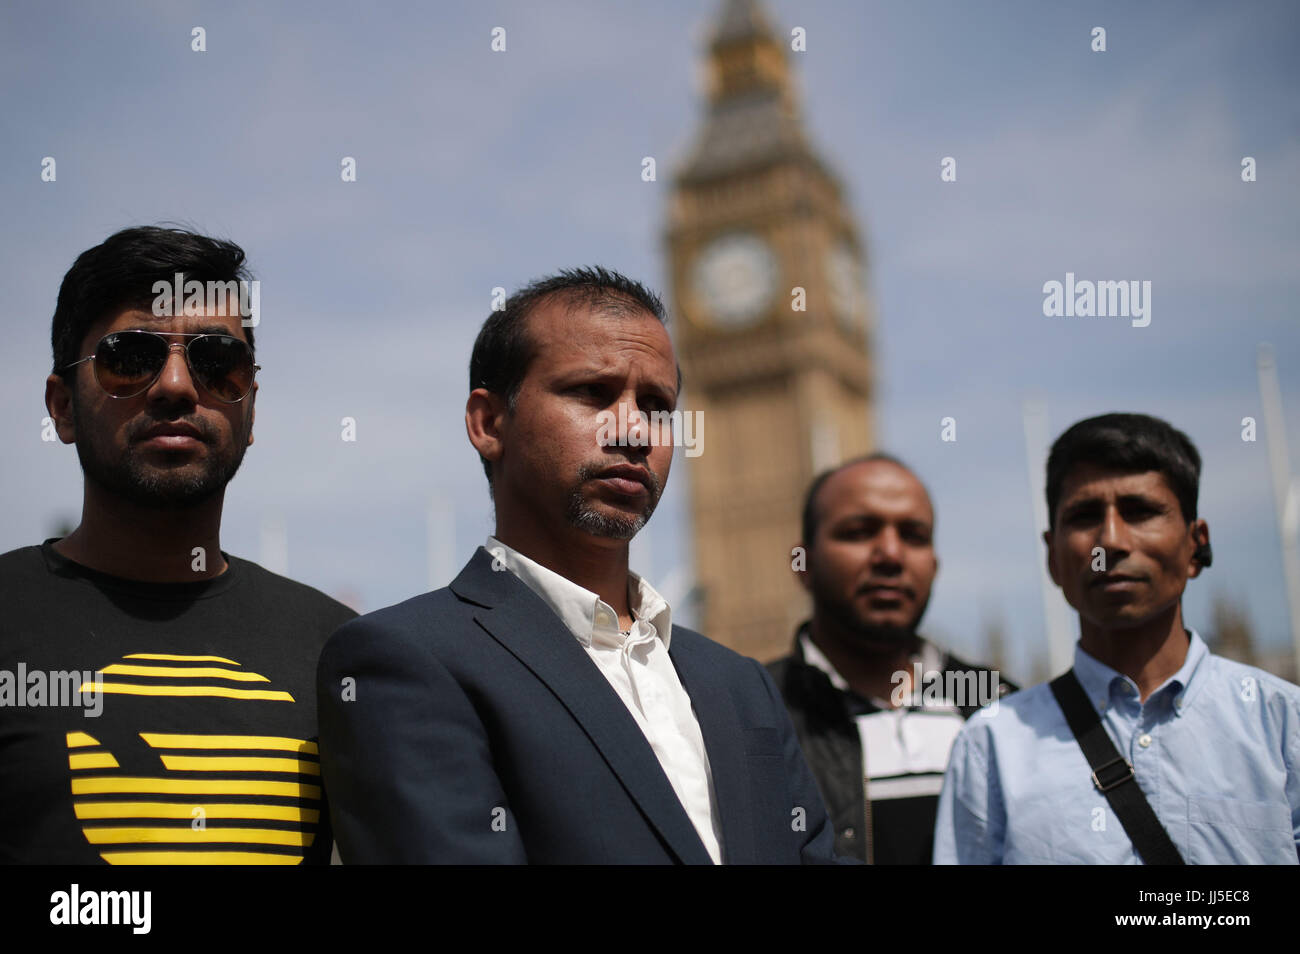 Jabed Hussain (2nd left), 32, a rider for UberEATS who had his moped stolen when two suspects also riding a moped sprayed him with liquid, during a food delivery riders demonstration in Parliament Square following moped acid attacks after five separate male victims were targeted by two moped-riding attackers in the north and east of the capital on Thursday night. Stock Photo